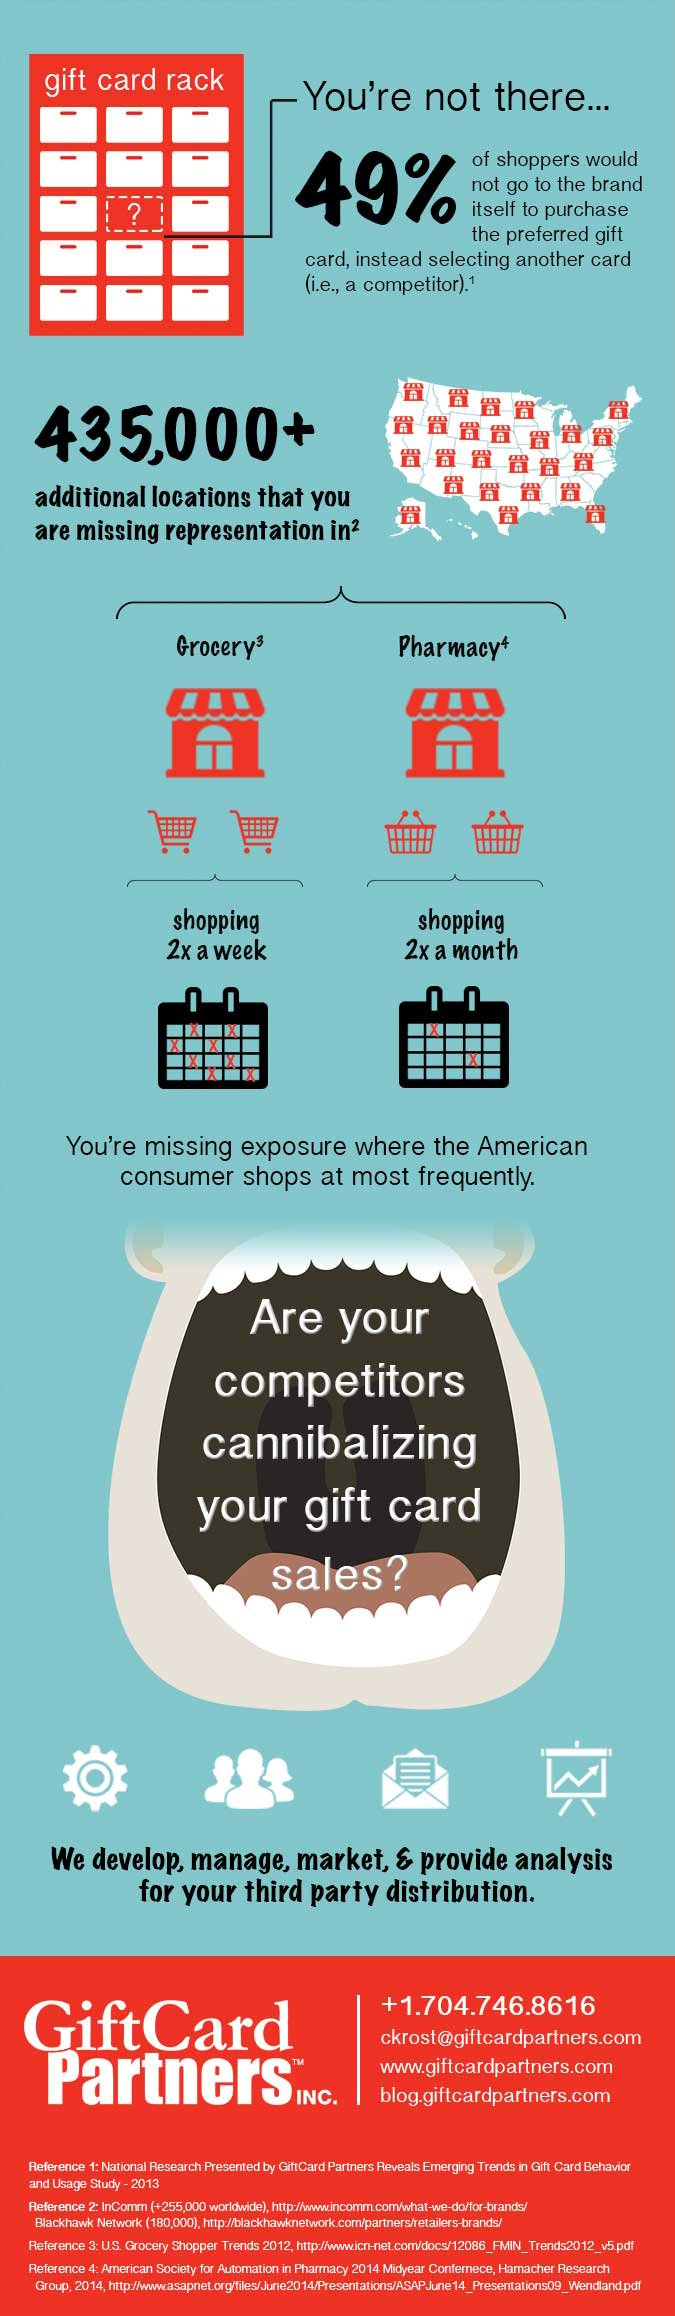 Infographic - Cannibalizing Gift Card Sales